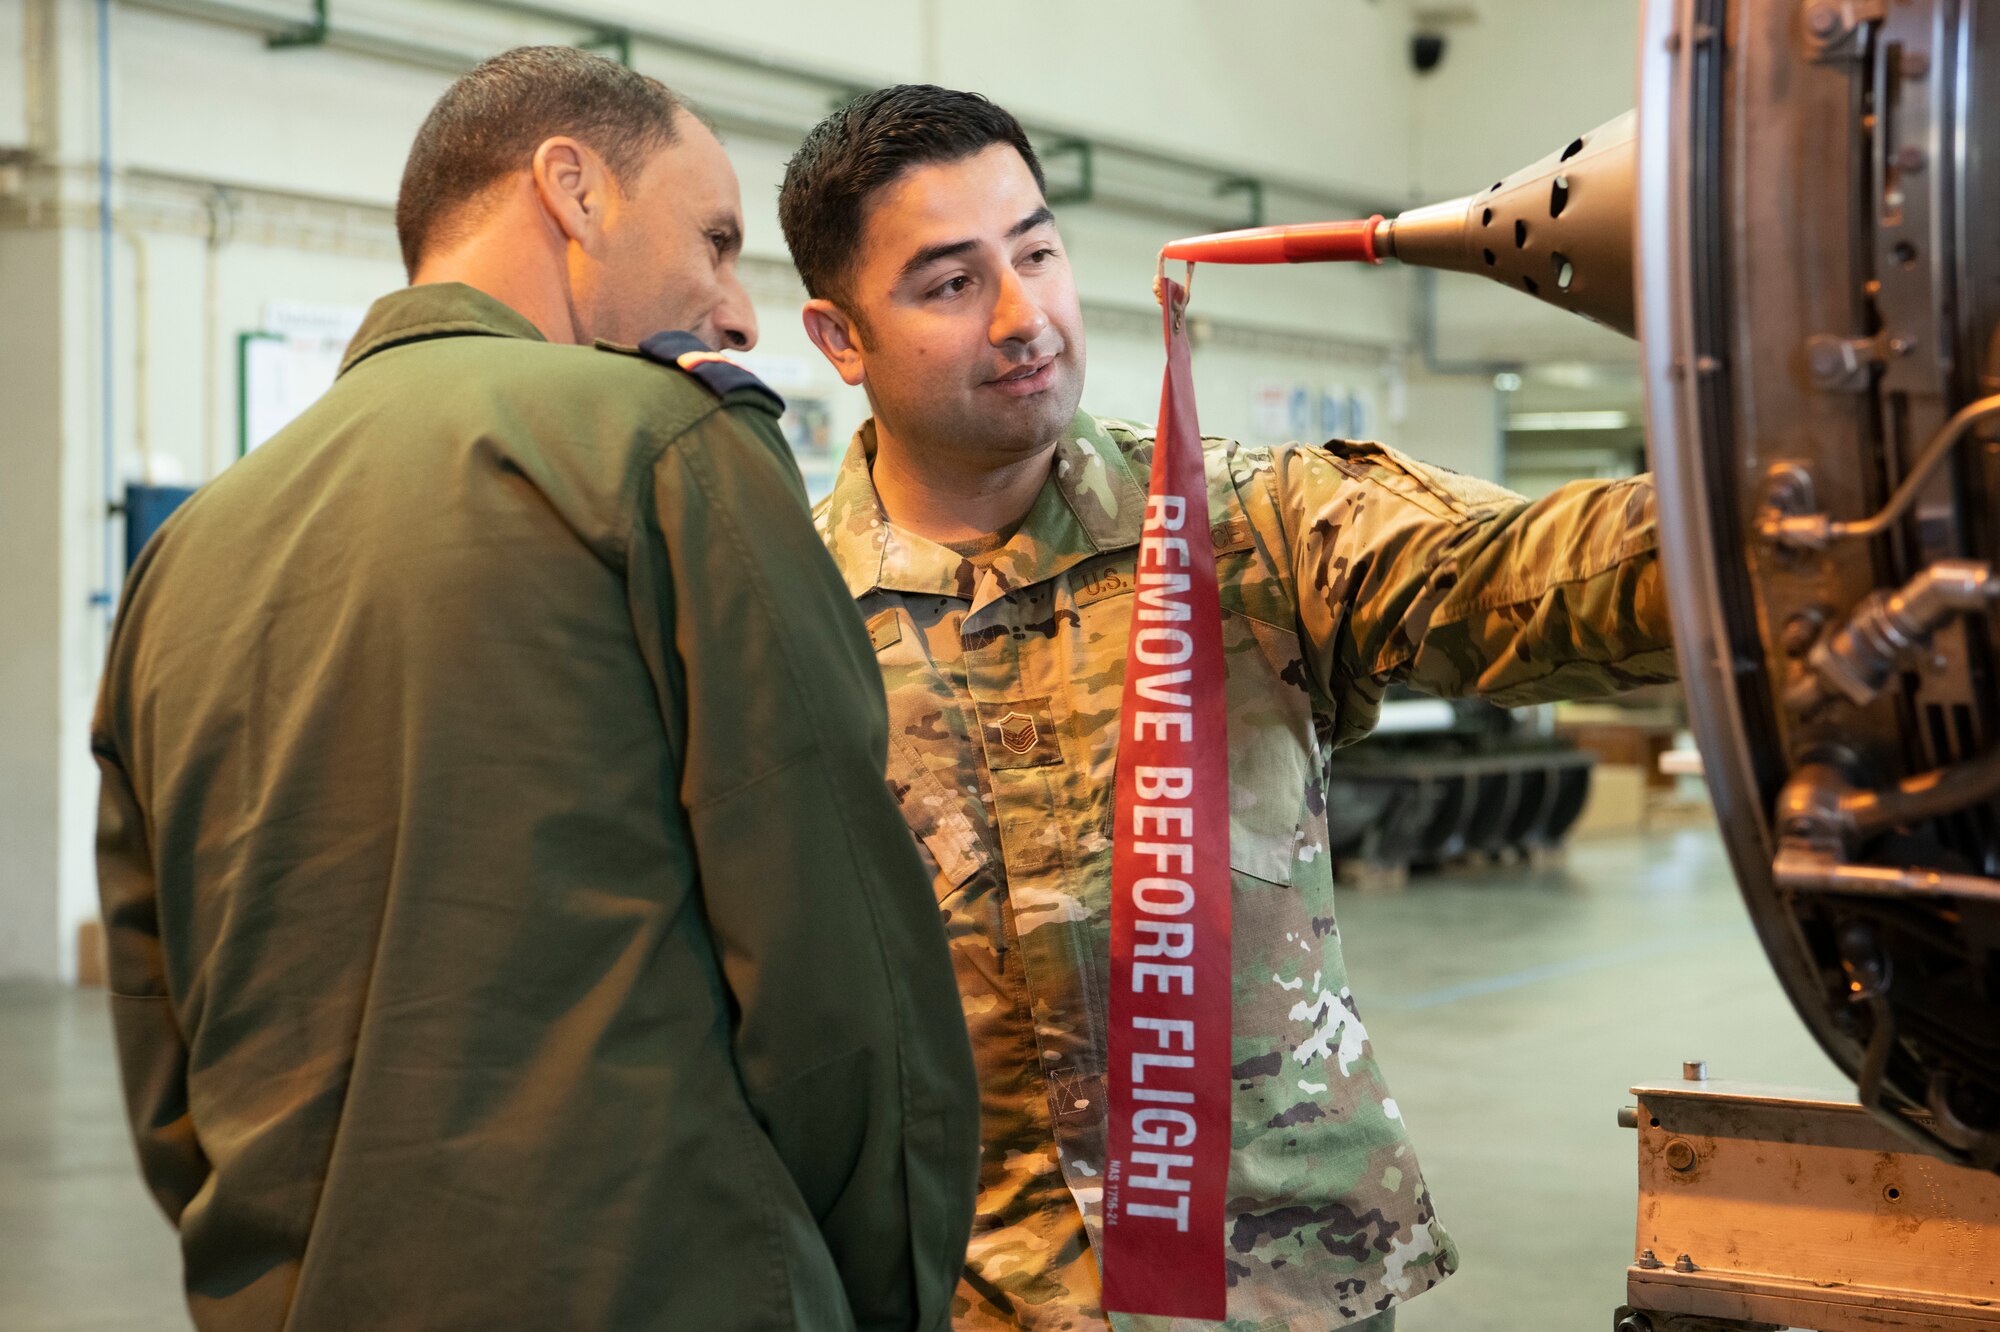 U.S. Air Force Master Sgt. Eric Morales, production superintendent, assigned to the 721st Aircraft Maintenance Squadron, Ramstein Air Base, Germany, observes Portuguese aircraft parts with a member of the European Partnership Flight at Monte Real Air Base, Portugal, Sept. 10, 2019. The European Partnership Flight serves as an opportunity for the U.S. and partner nations to share best practices, strengthen relationships, and build trust. (U.S. Army photo by Specialist Catessa Palone)